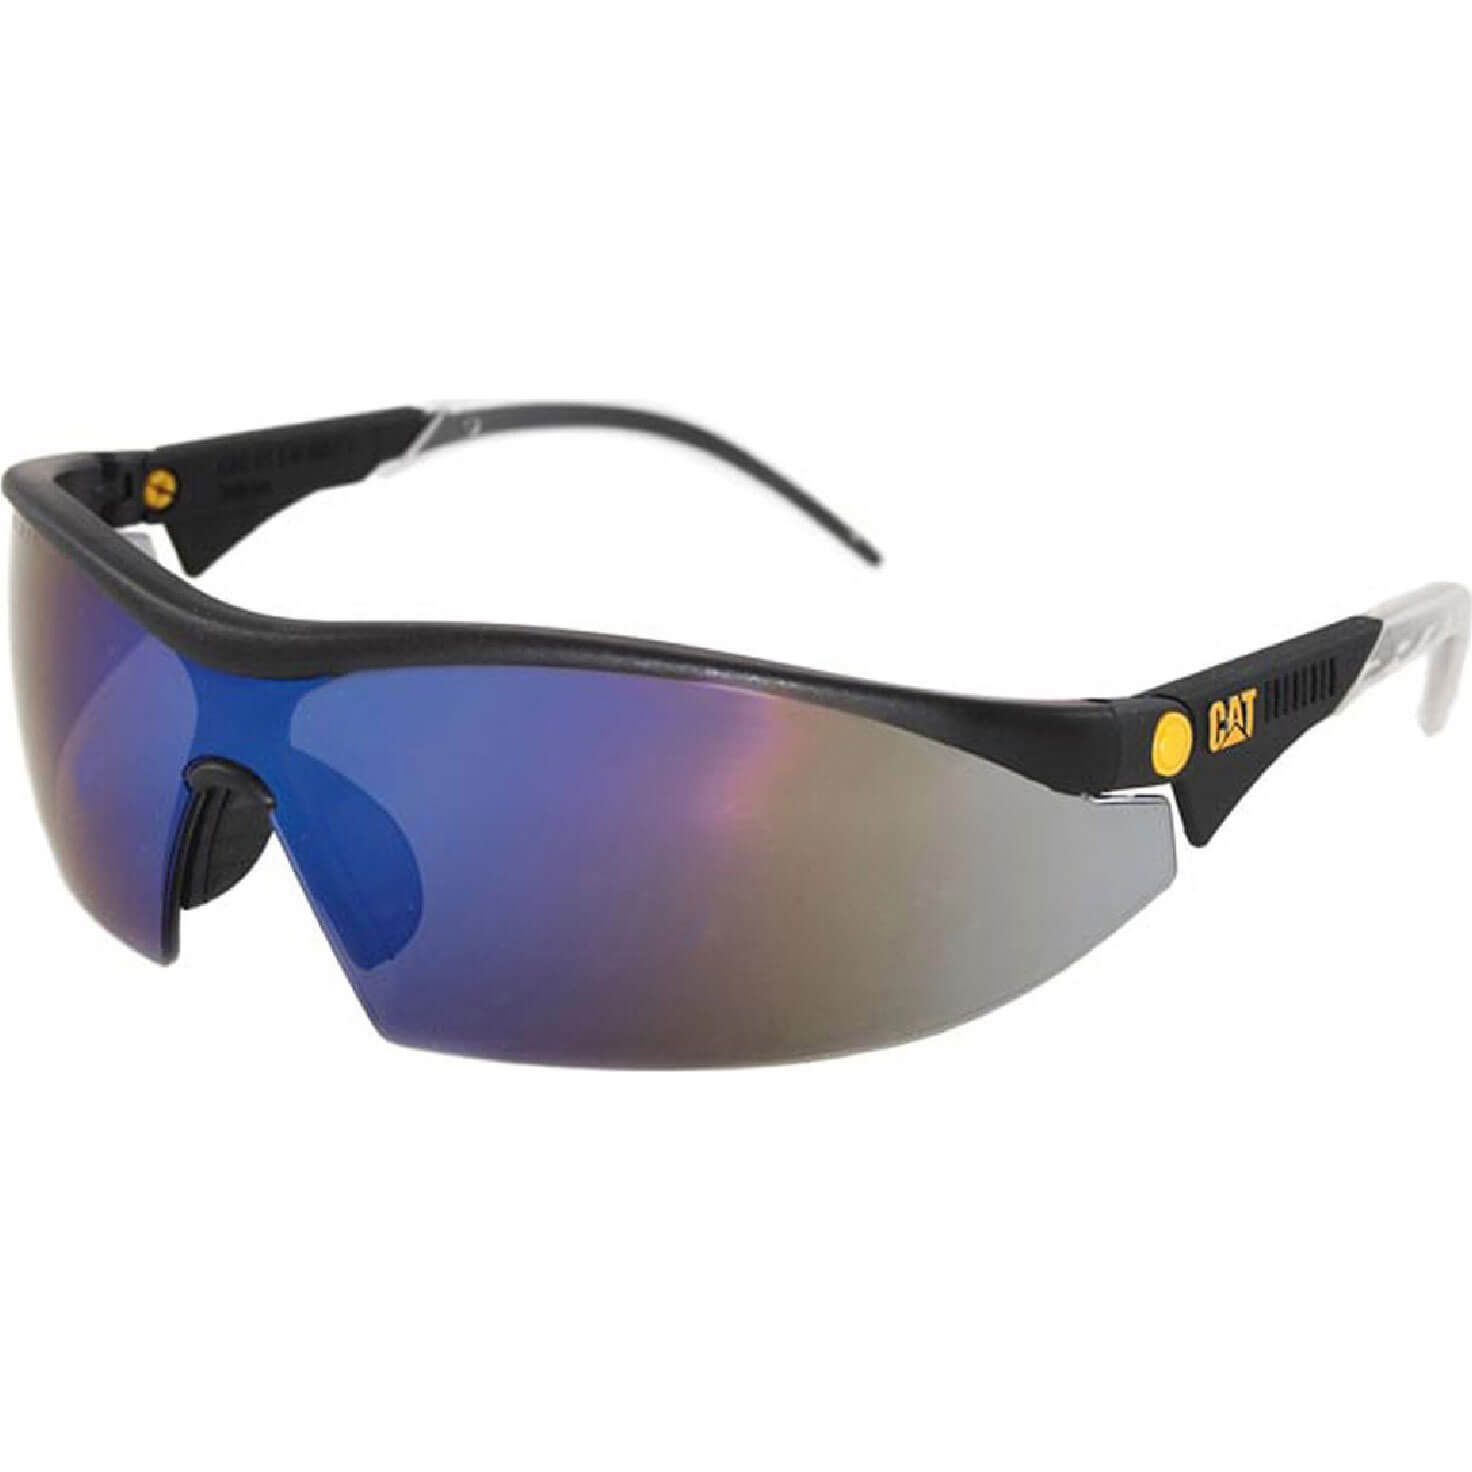 Image of Caterpillar Digger Protective Safety Glasses Blue